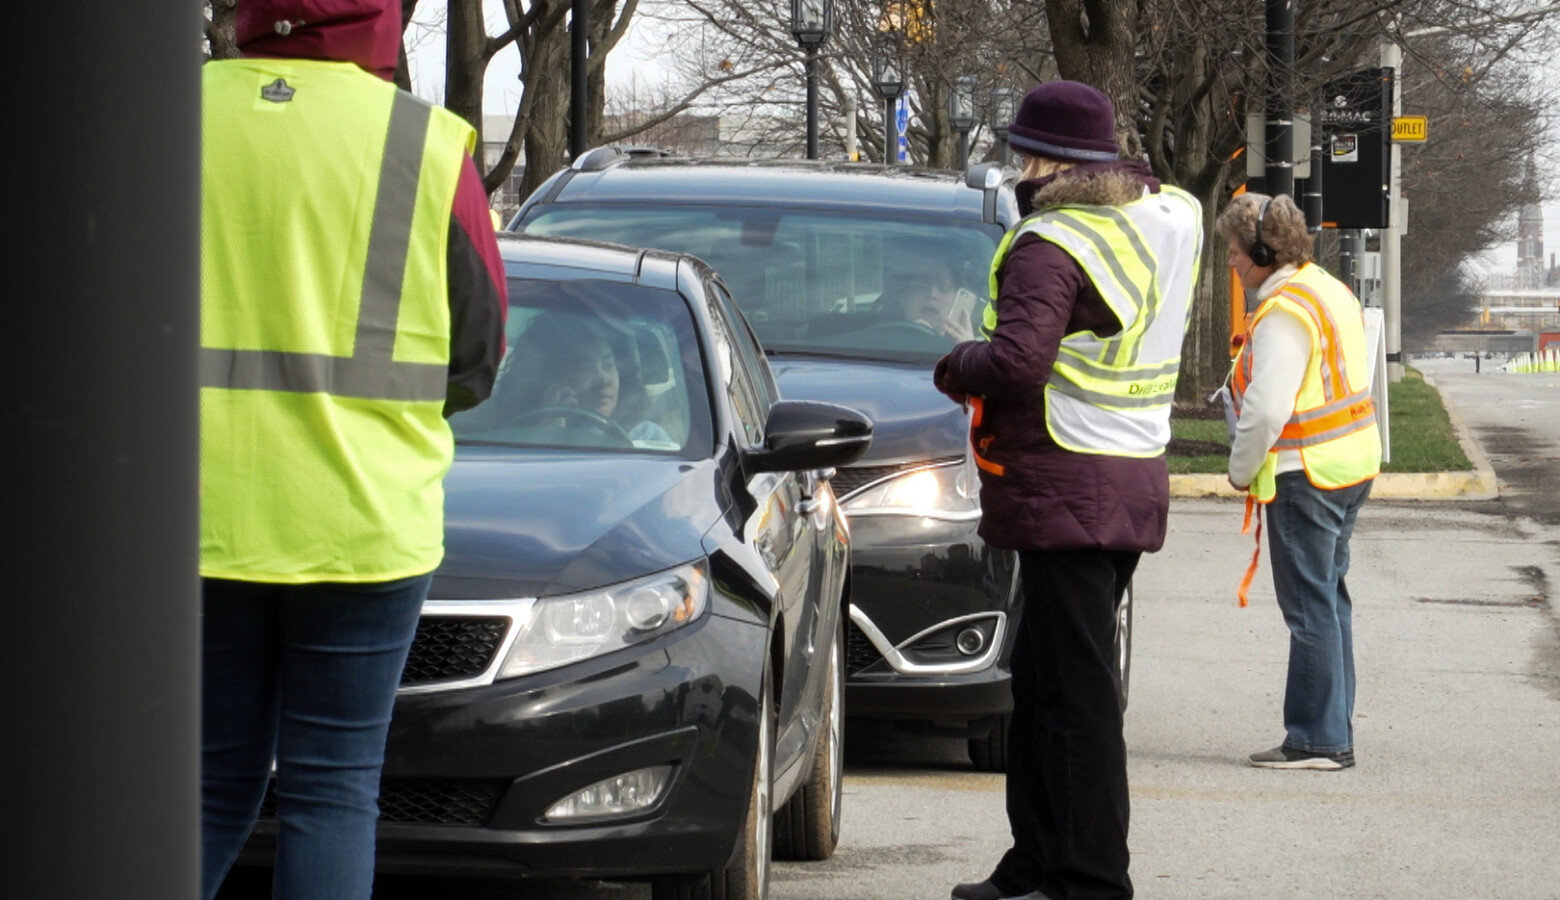 Eli Lilly has expanded its drive-thru testing for COVID-19 to "front-line essential" workers, such as grocery store cashiers. (Alan Mbathi/IPB News)